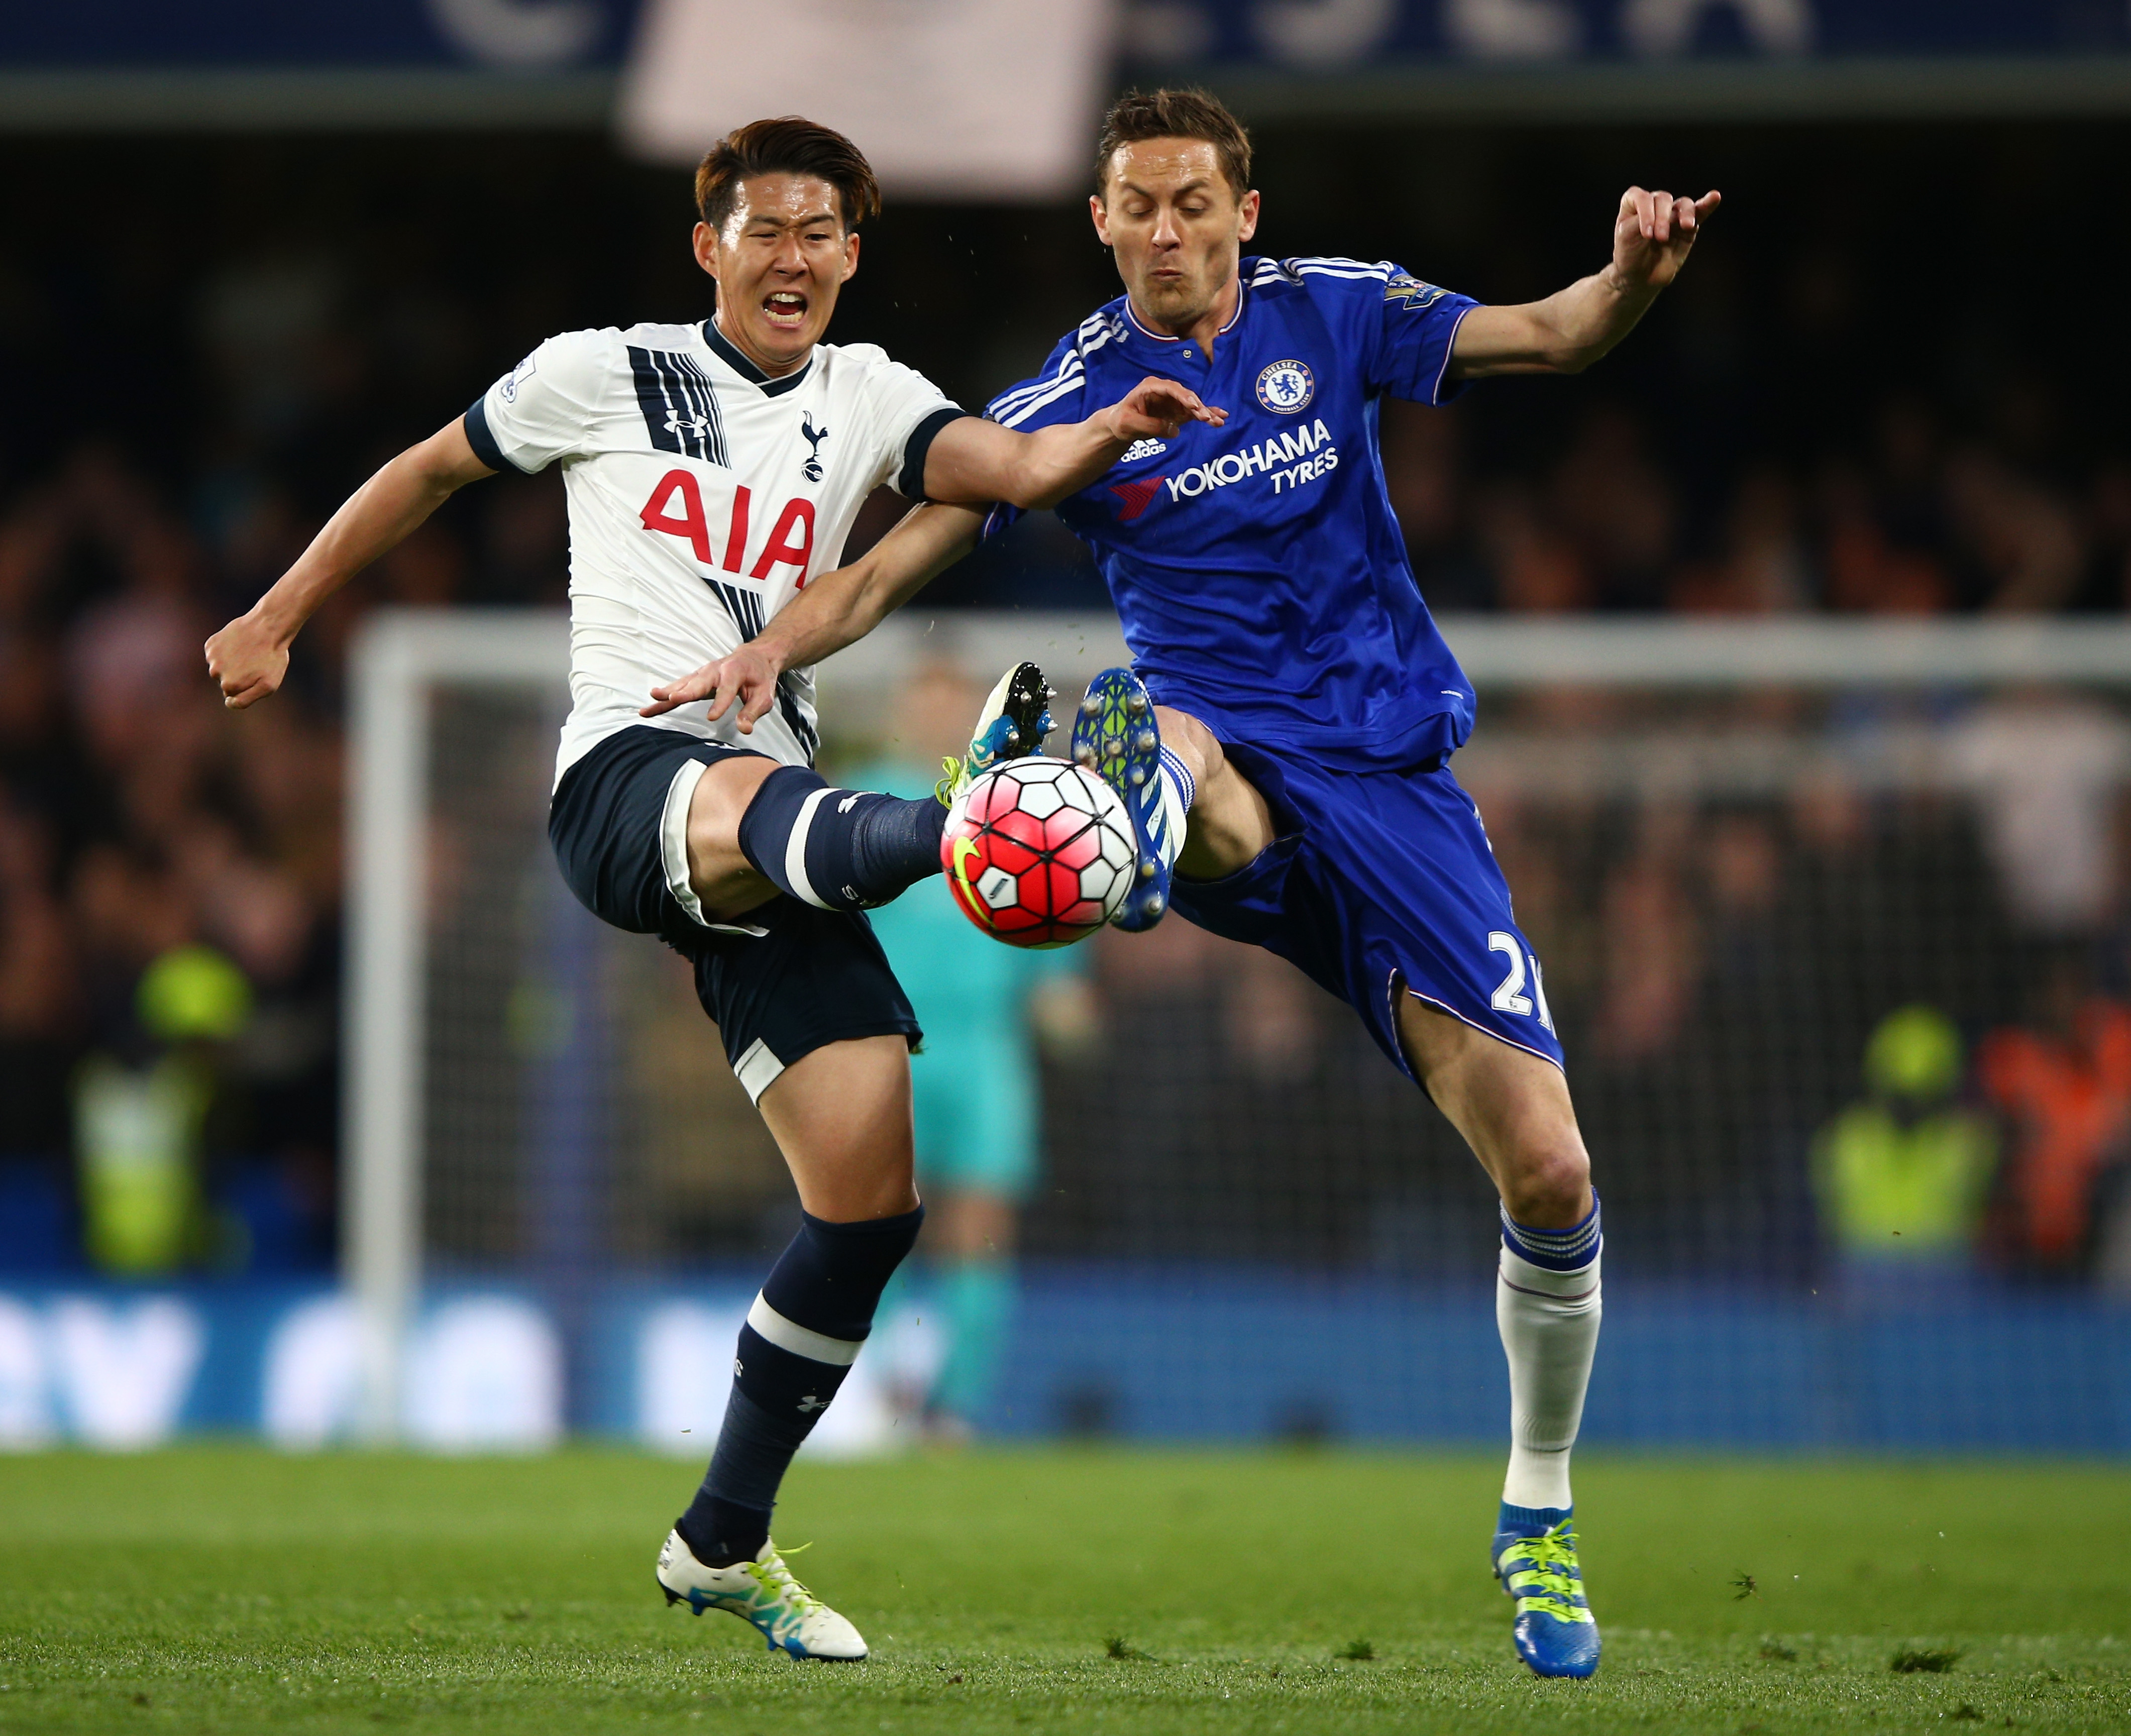 LONDON, ENGLAND - MAY 02:  Son Heung-Min of Tottenham Hotspur and Nemanja Matic of Chelsea battle for the ball during the Barclays Premier League match between Chelsea and Tottenham Hotspur at Stamford Bridge on May 02, 2016 in London, England.  (Photo by Ian Walton/Getty Images)